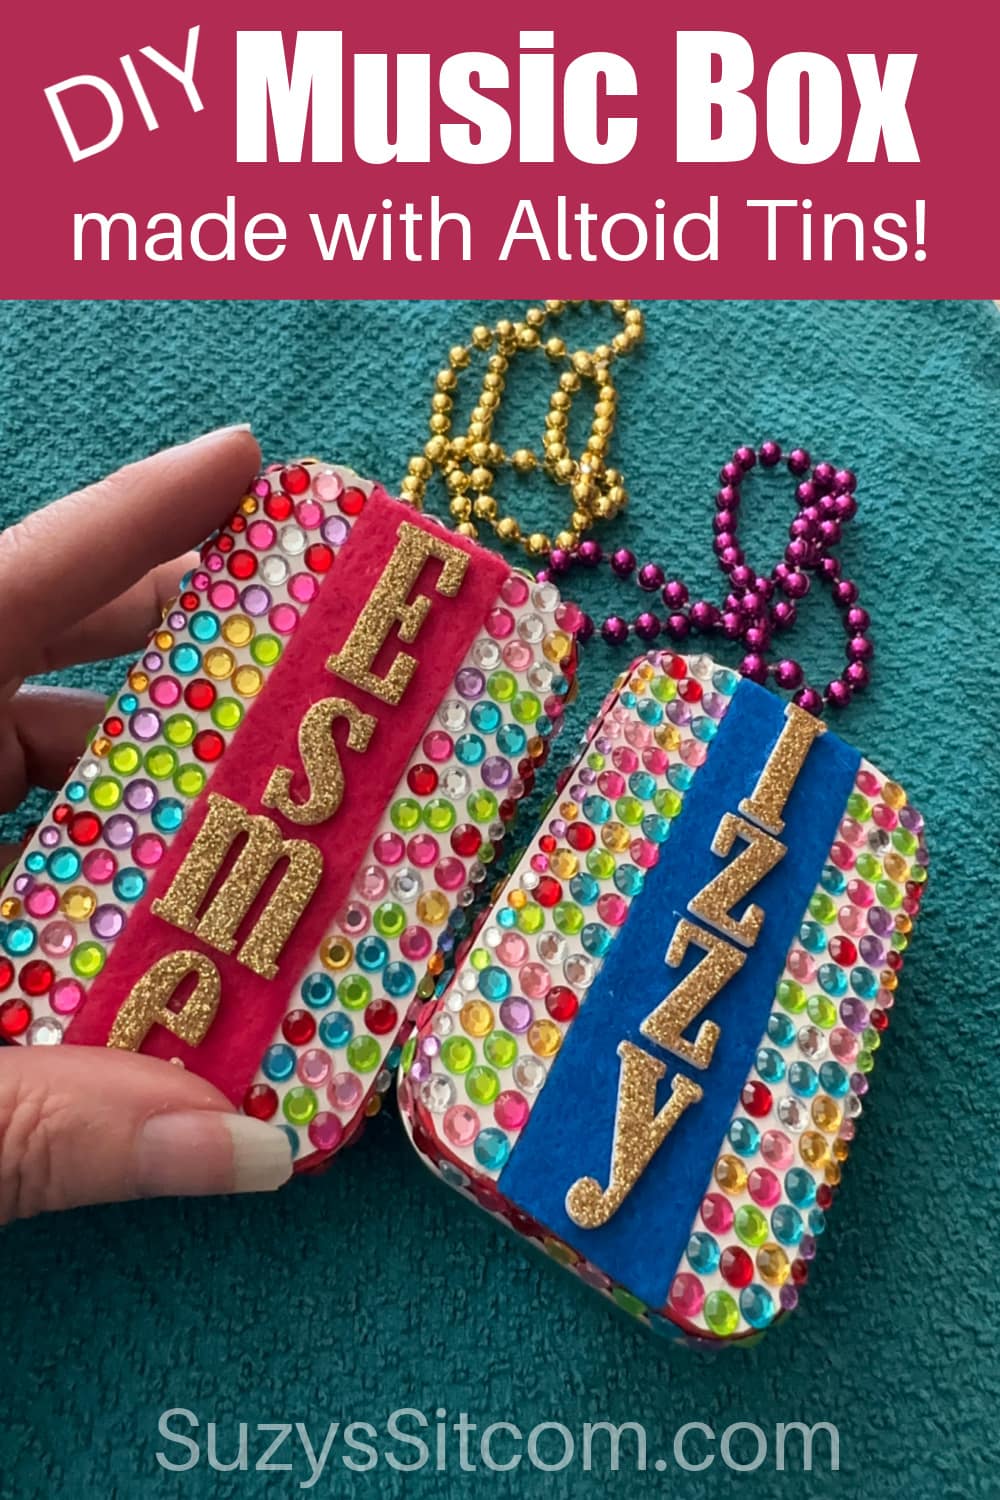 Music boxes made with Altoid Tins